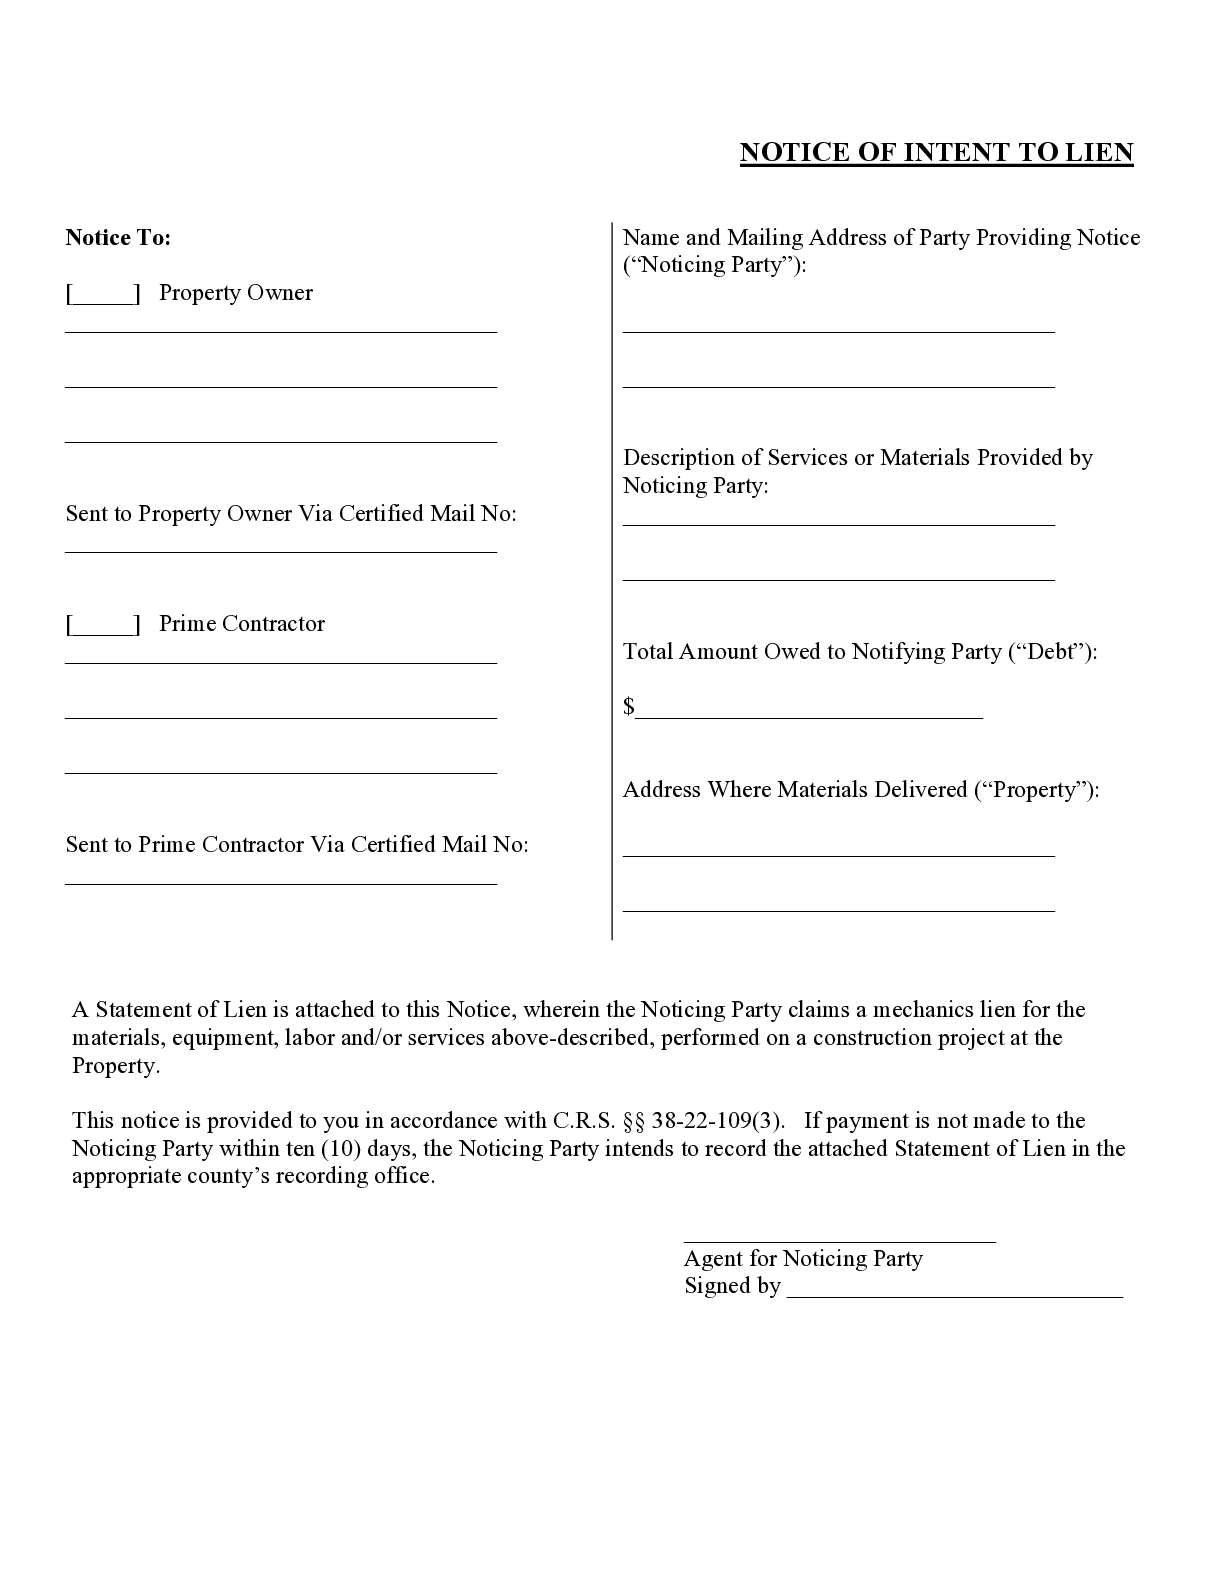 Colorado Notice of Intent to Lien Form | Free Downloadable Template - free from